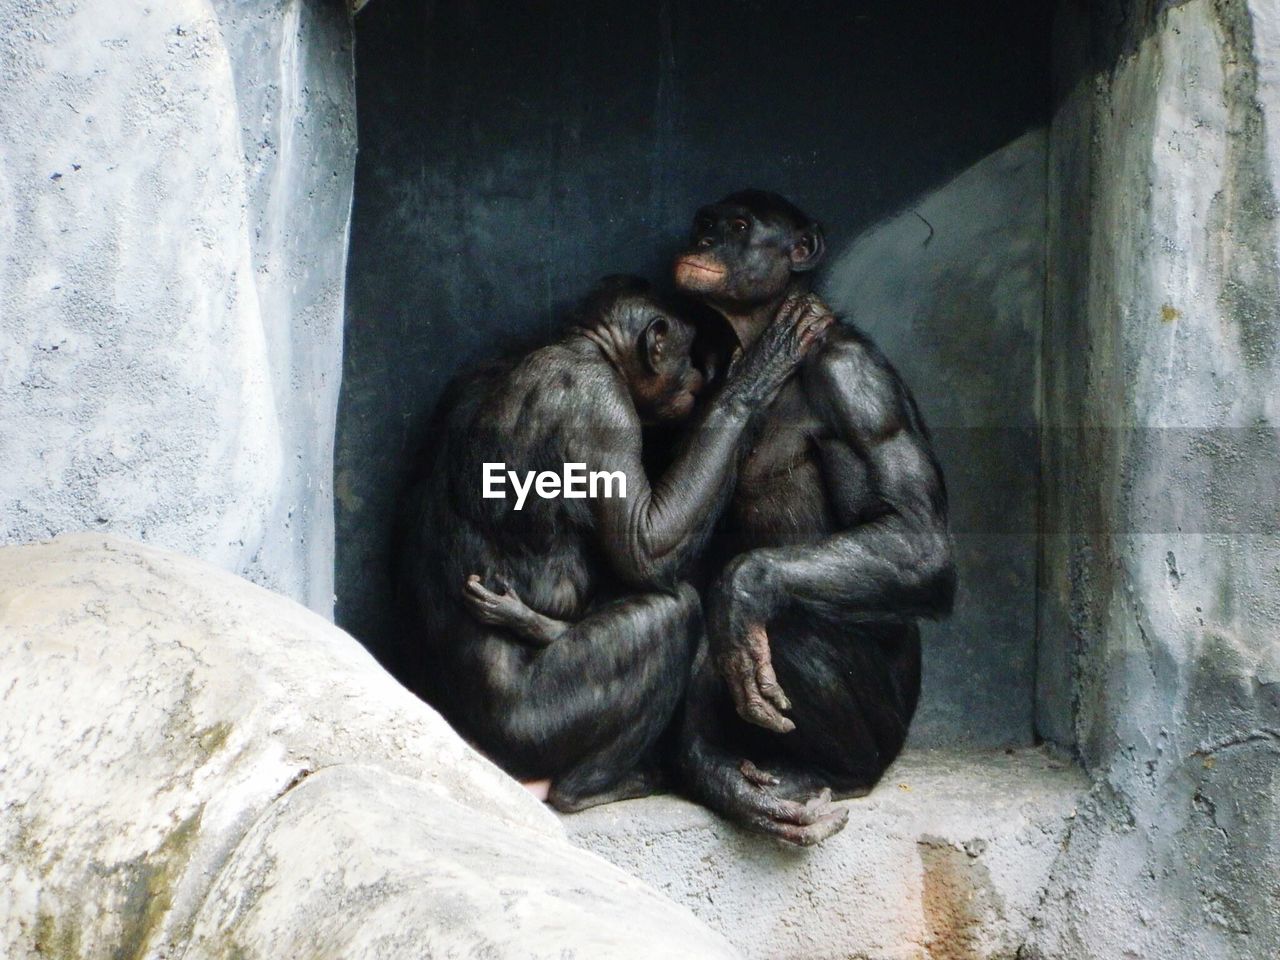 Bonobos sitting in niche at zoo